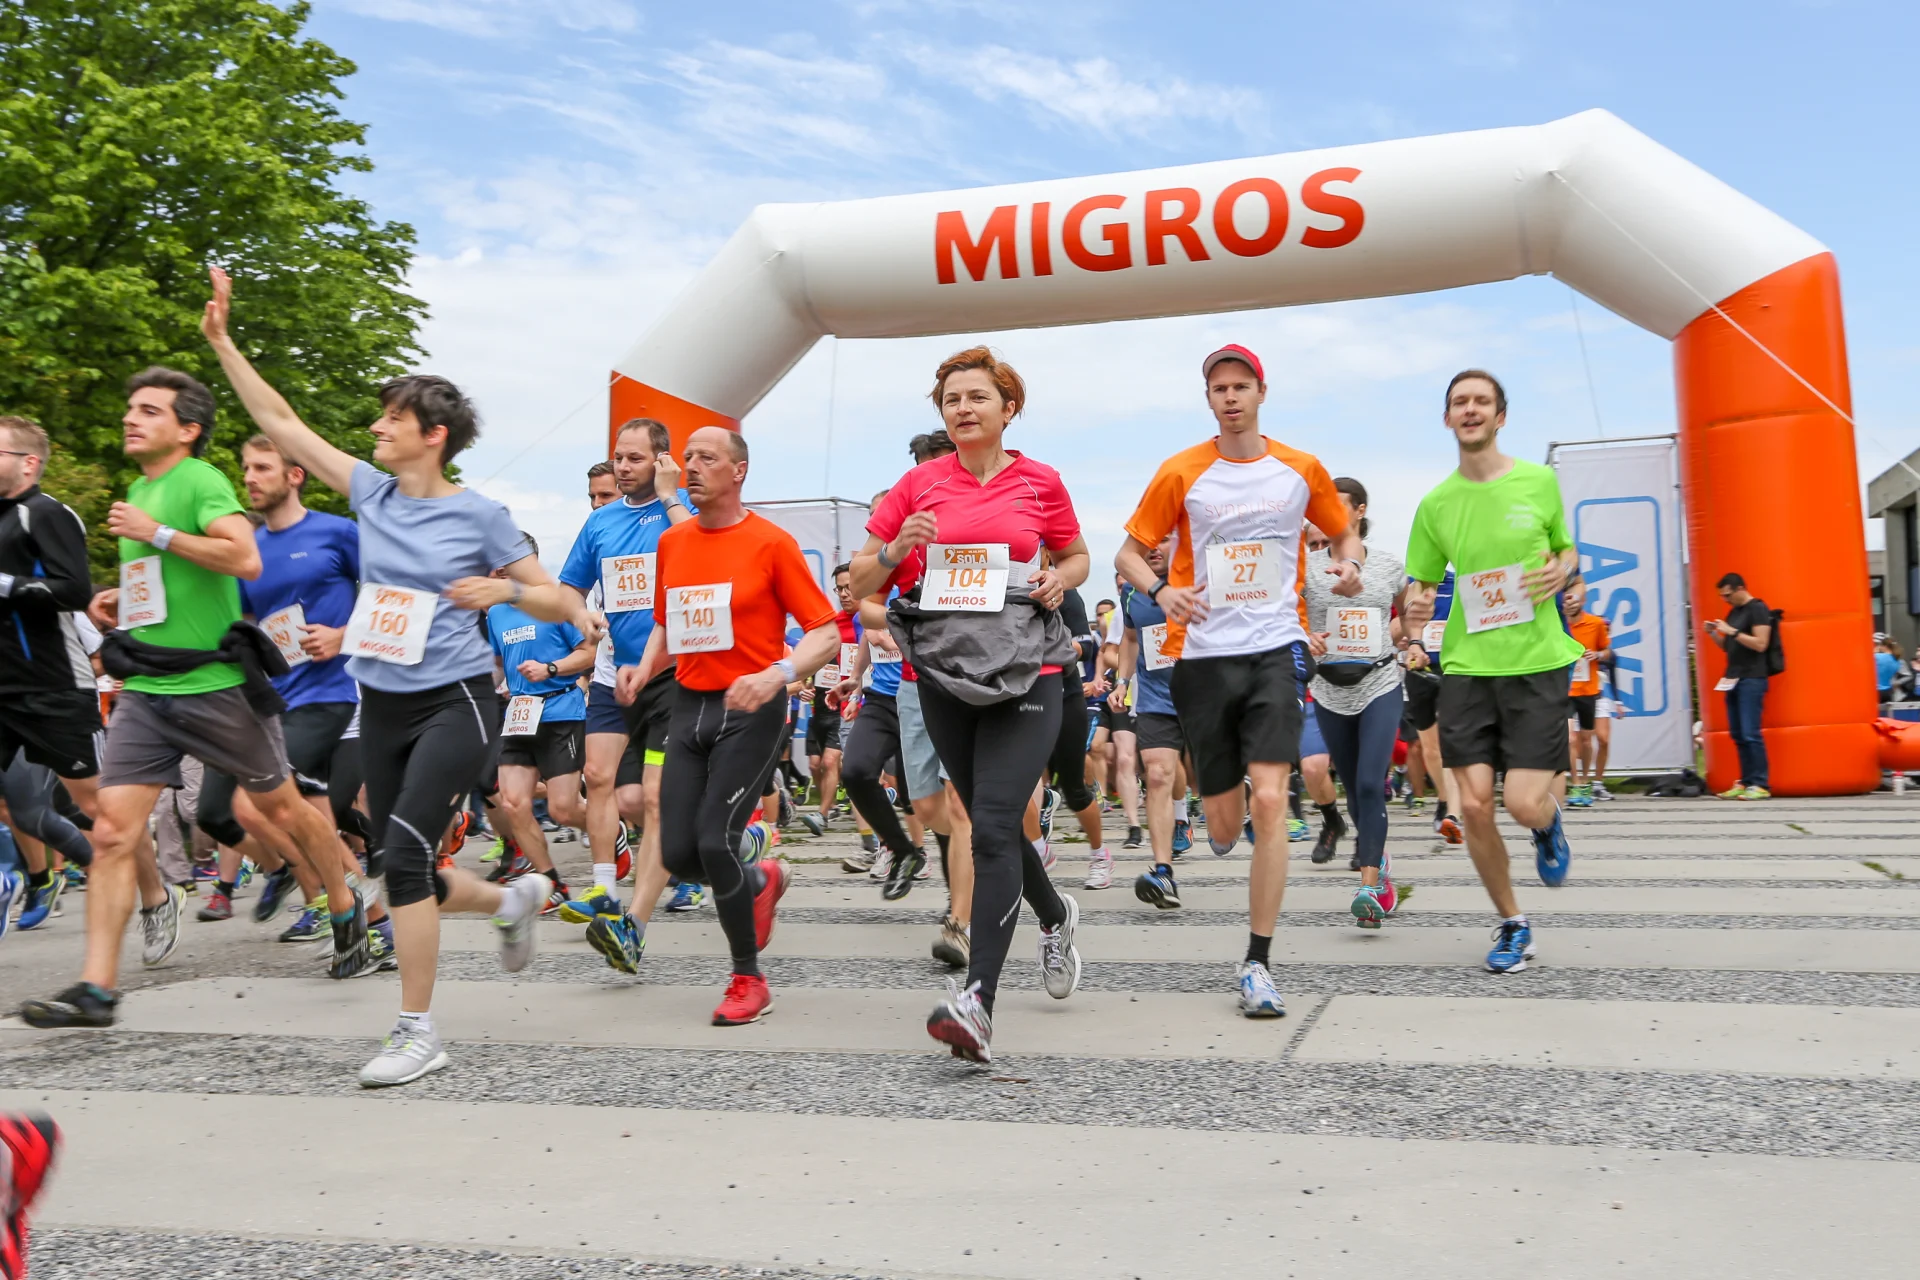 Runners passing under an inflatable Migros archway.